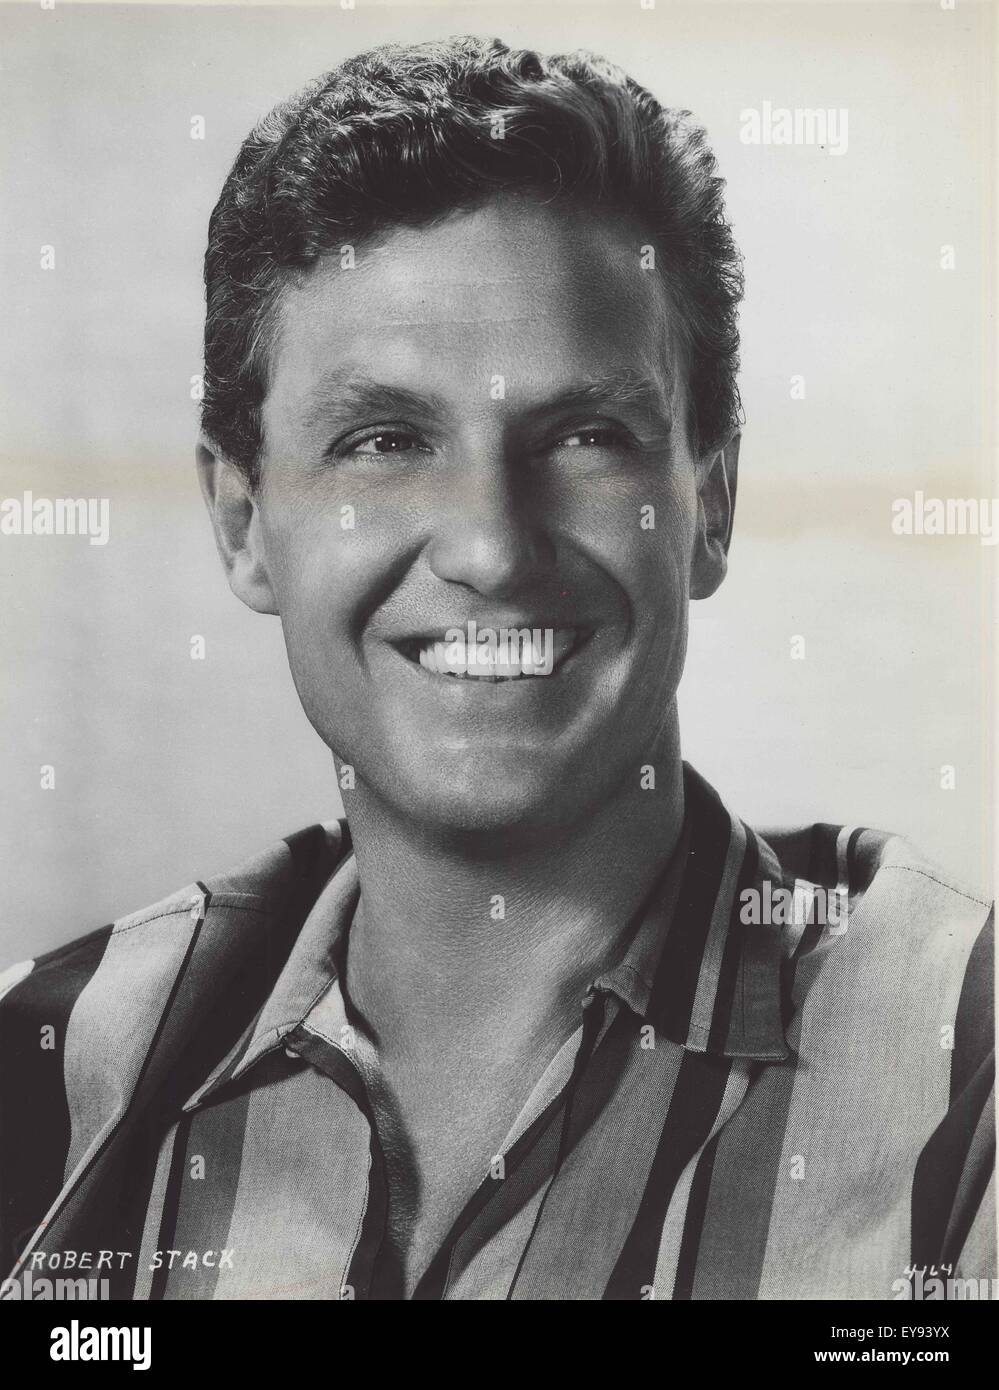 ROBERT STACK 1960.Supplied by Photos, inc. (Credit Image: © Supplied By Globe Photos, Inc/Globe Photos via ZUMA Wire via ZUMA Wire) Stock Photo